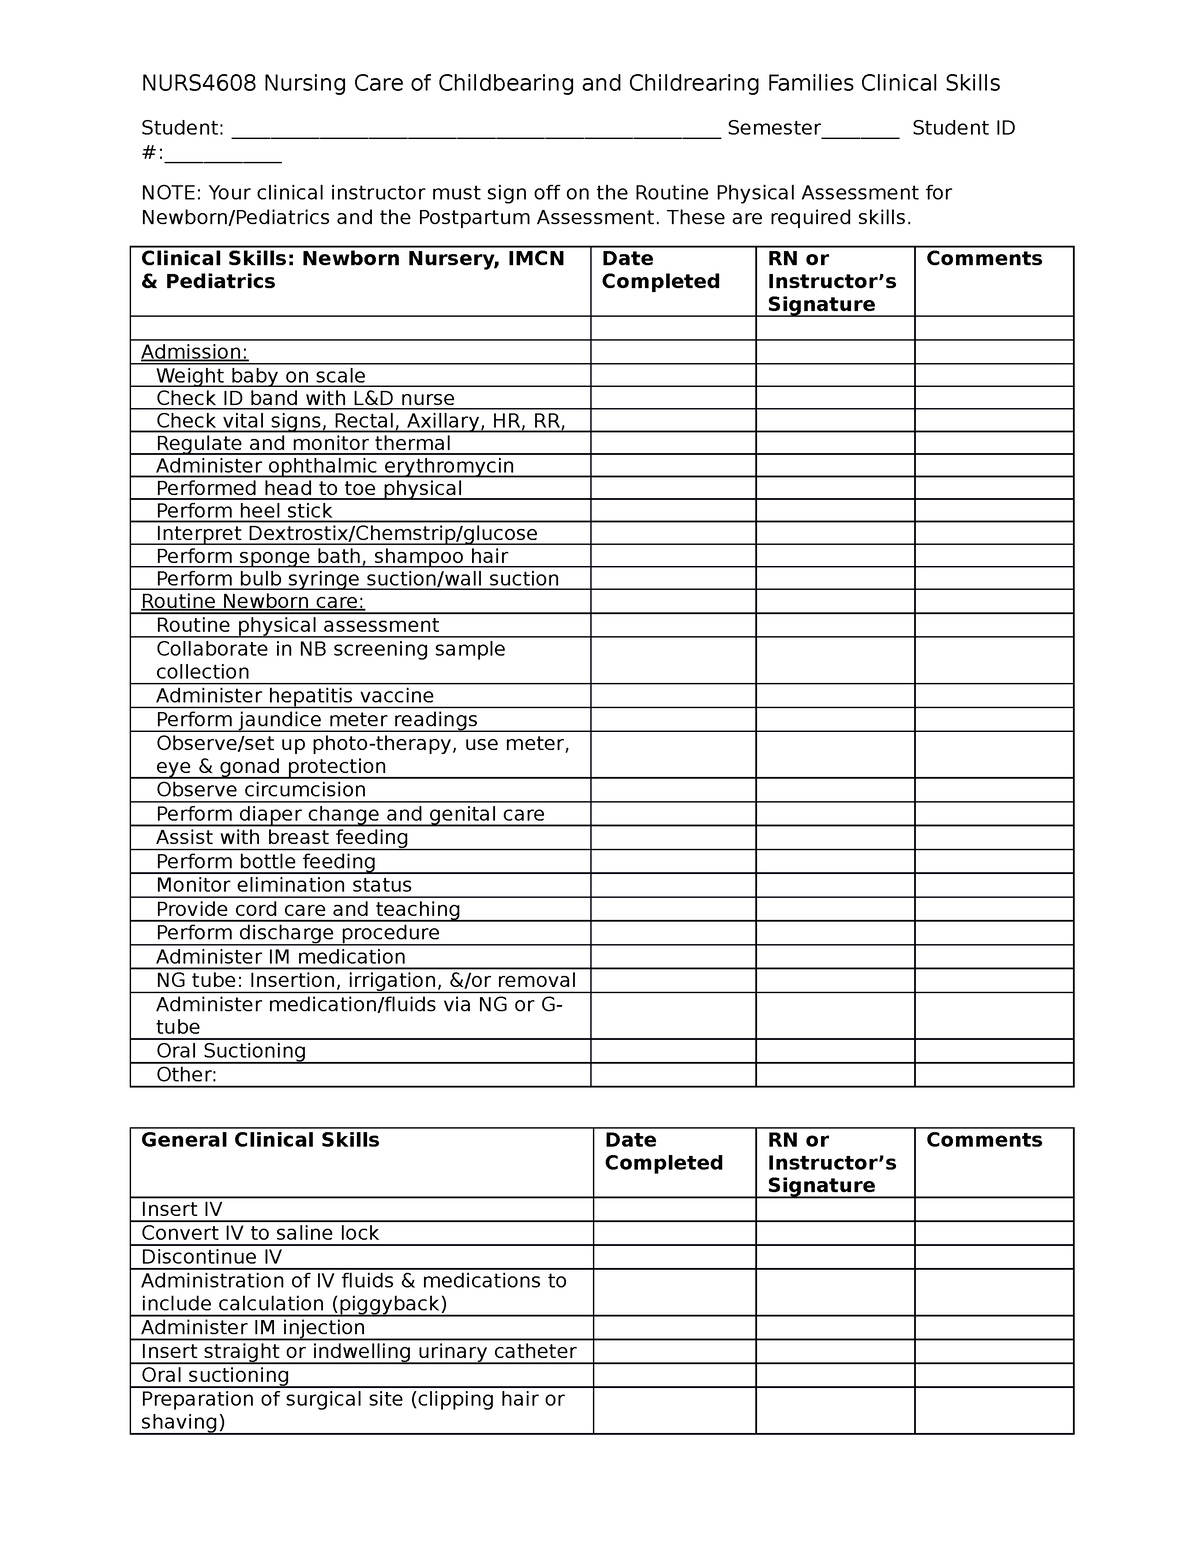 Clinical Skills Checklist - NURS4608 Nursing Care of Childbearing and ...